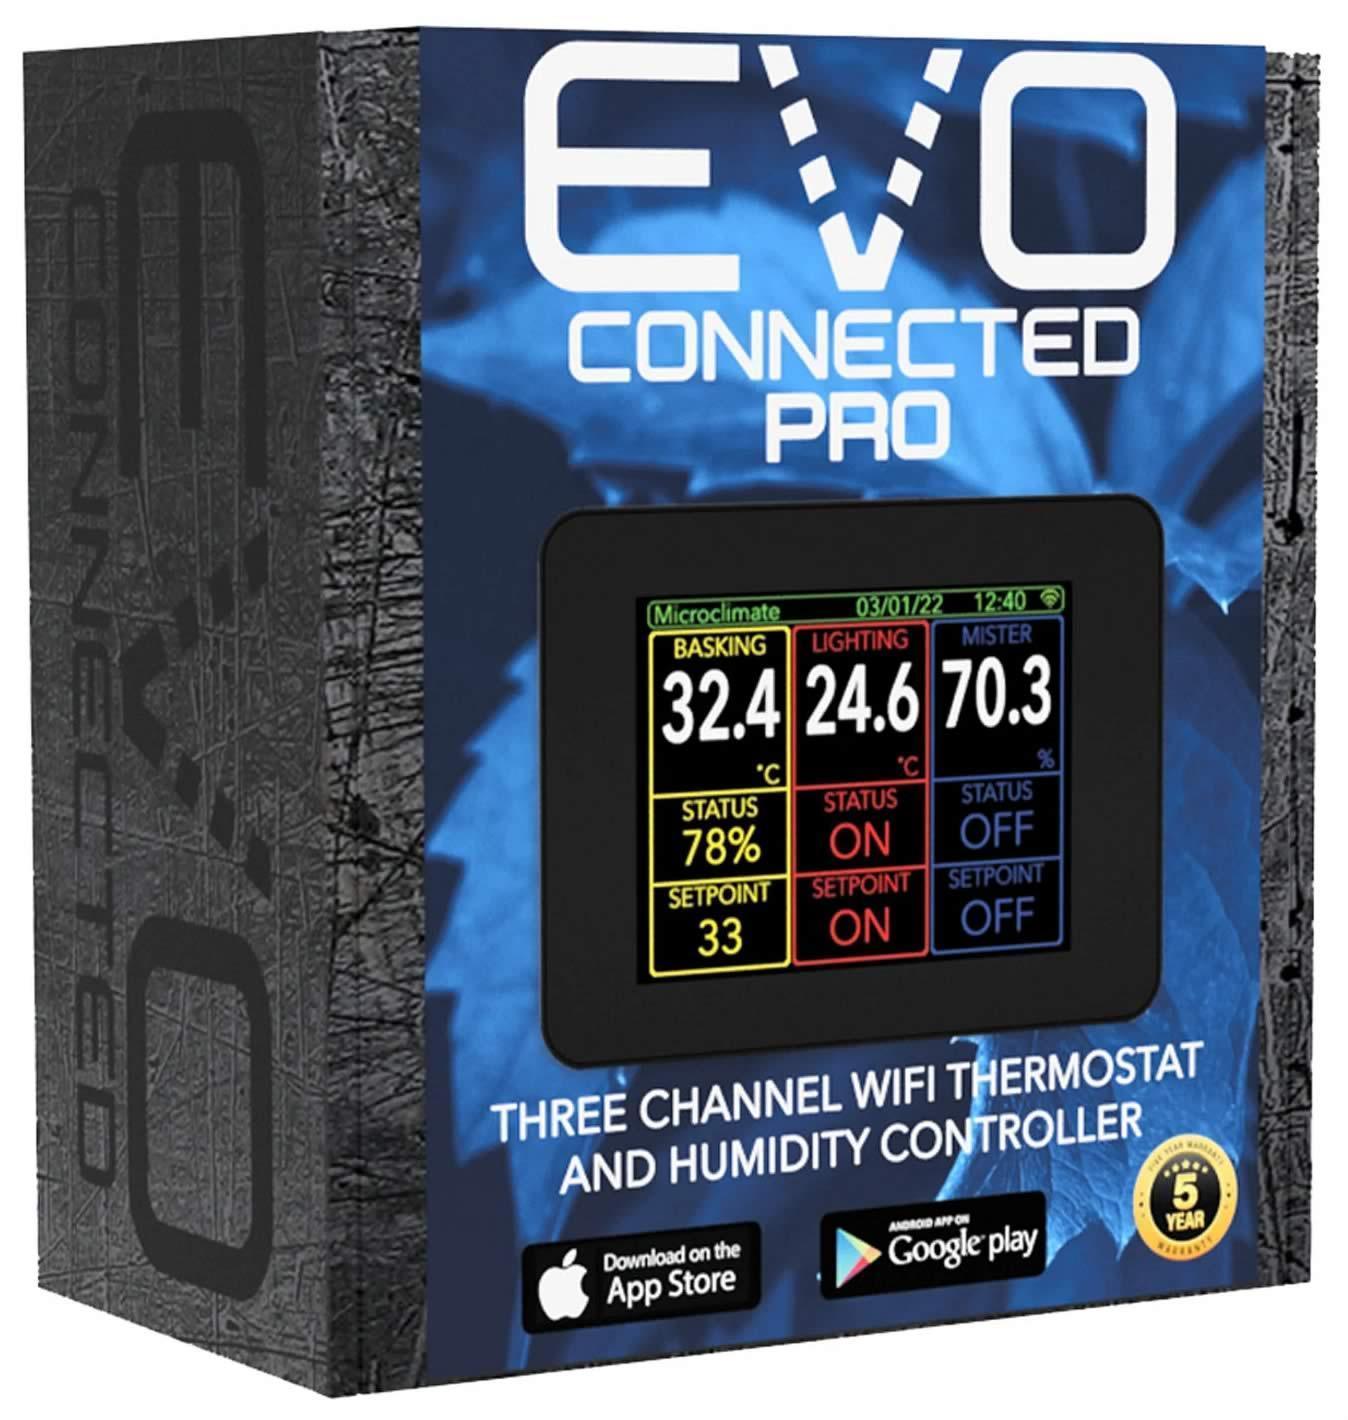 Microclimate Evo Connected Pro Thermostat - Amazing Amazon